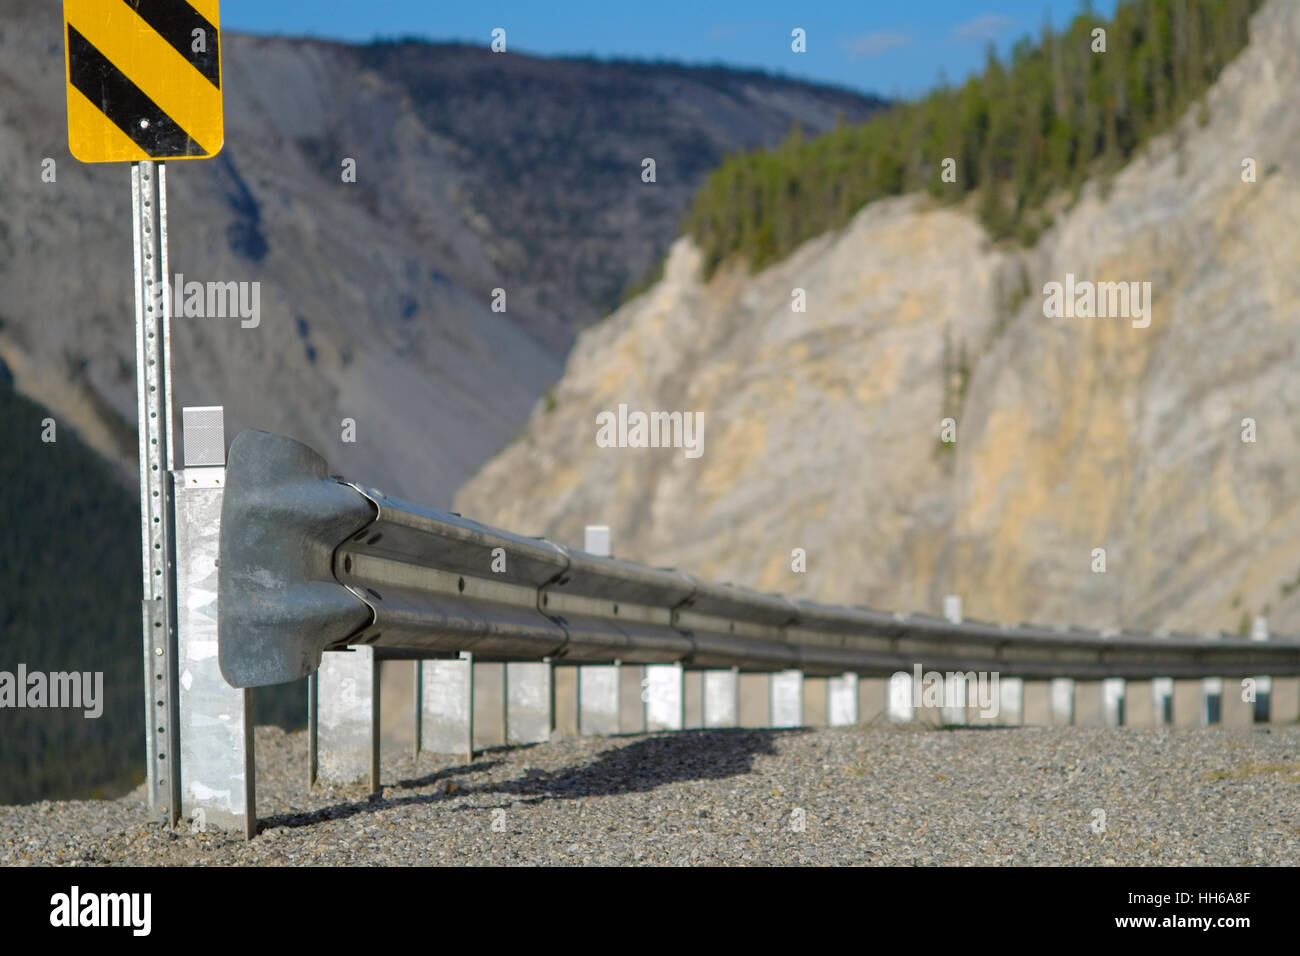 Highway fenders and guard rails improves trafic saftey. In North America we use guardrails or guard rails. Guard rails do improve passenger safety. Stock Photo